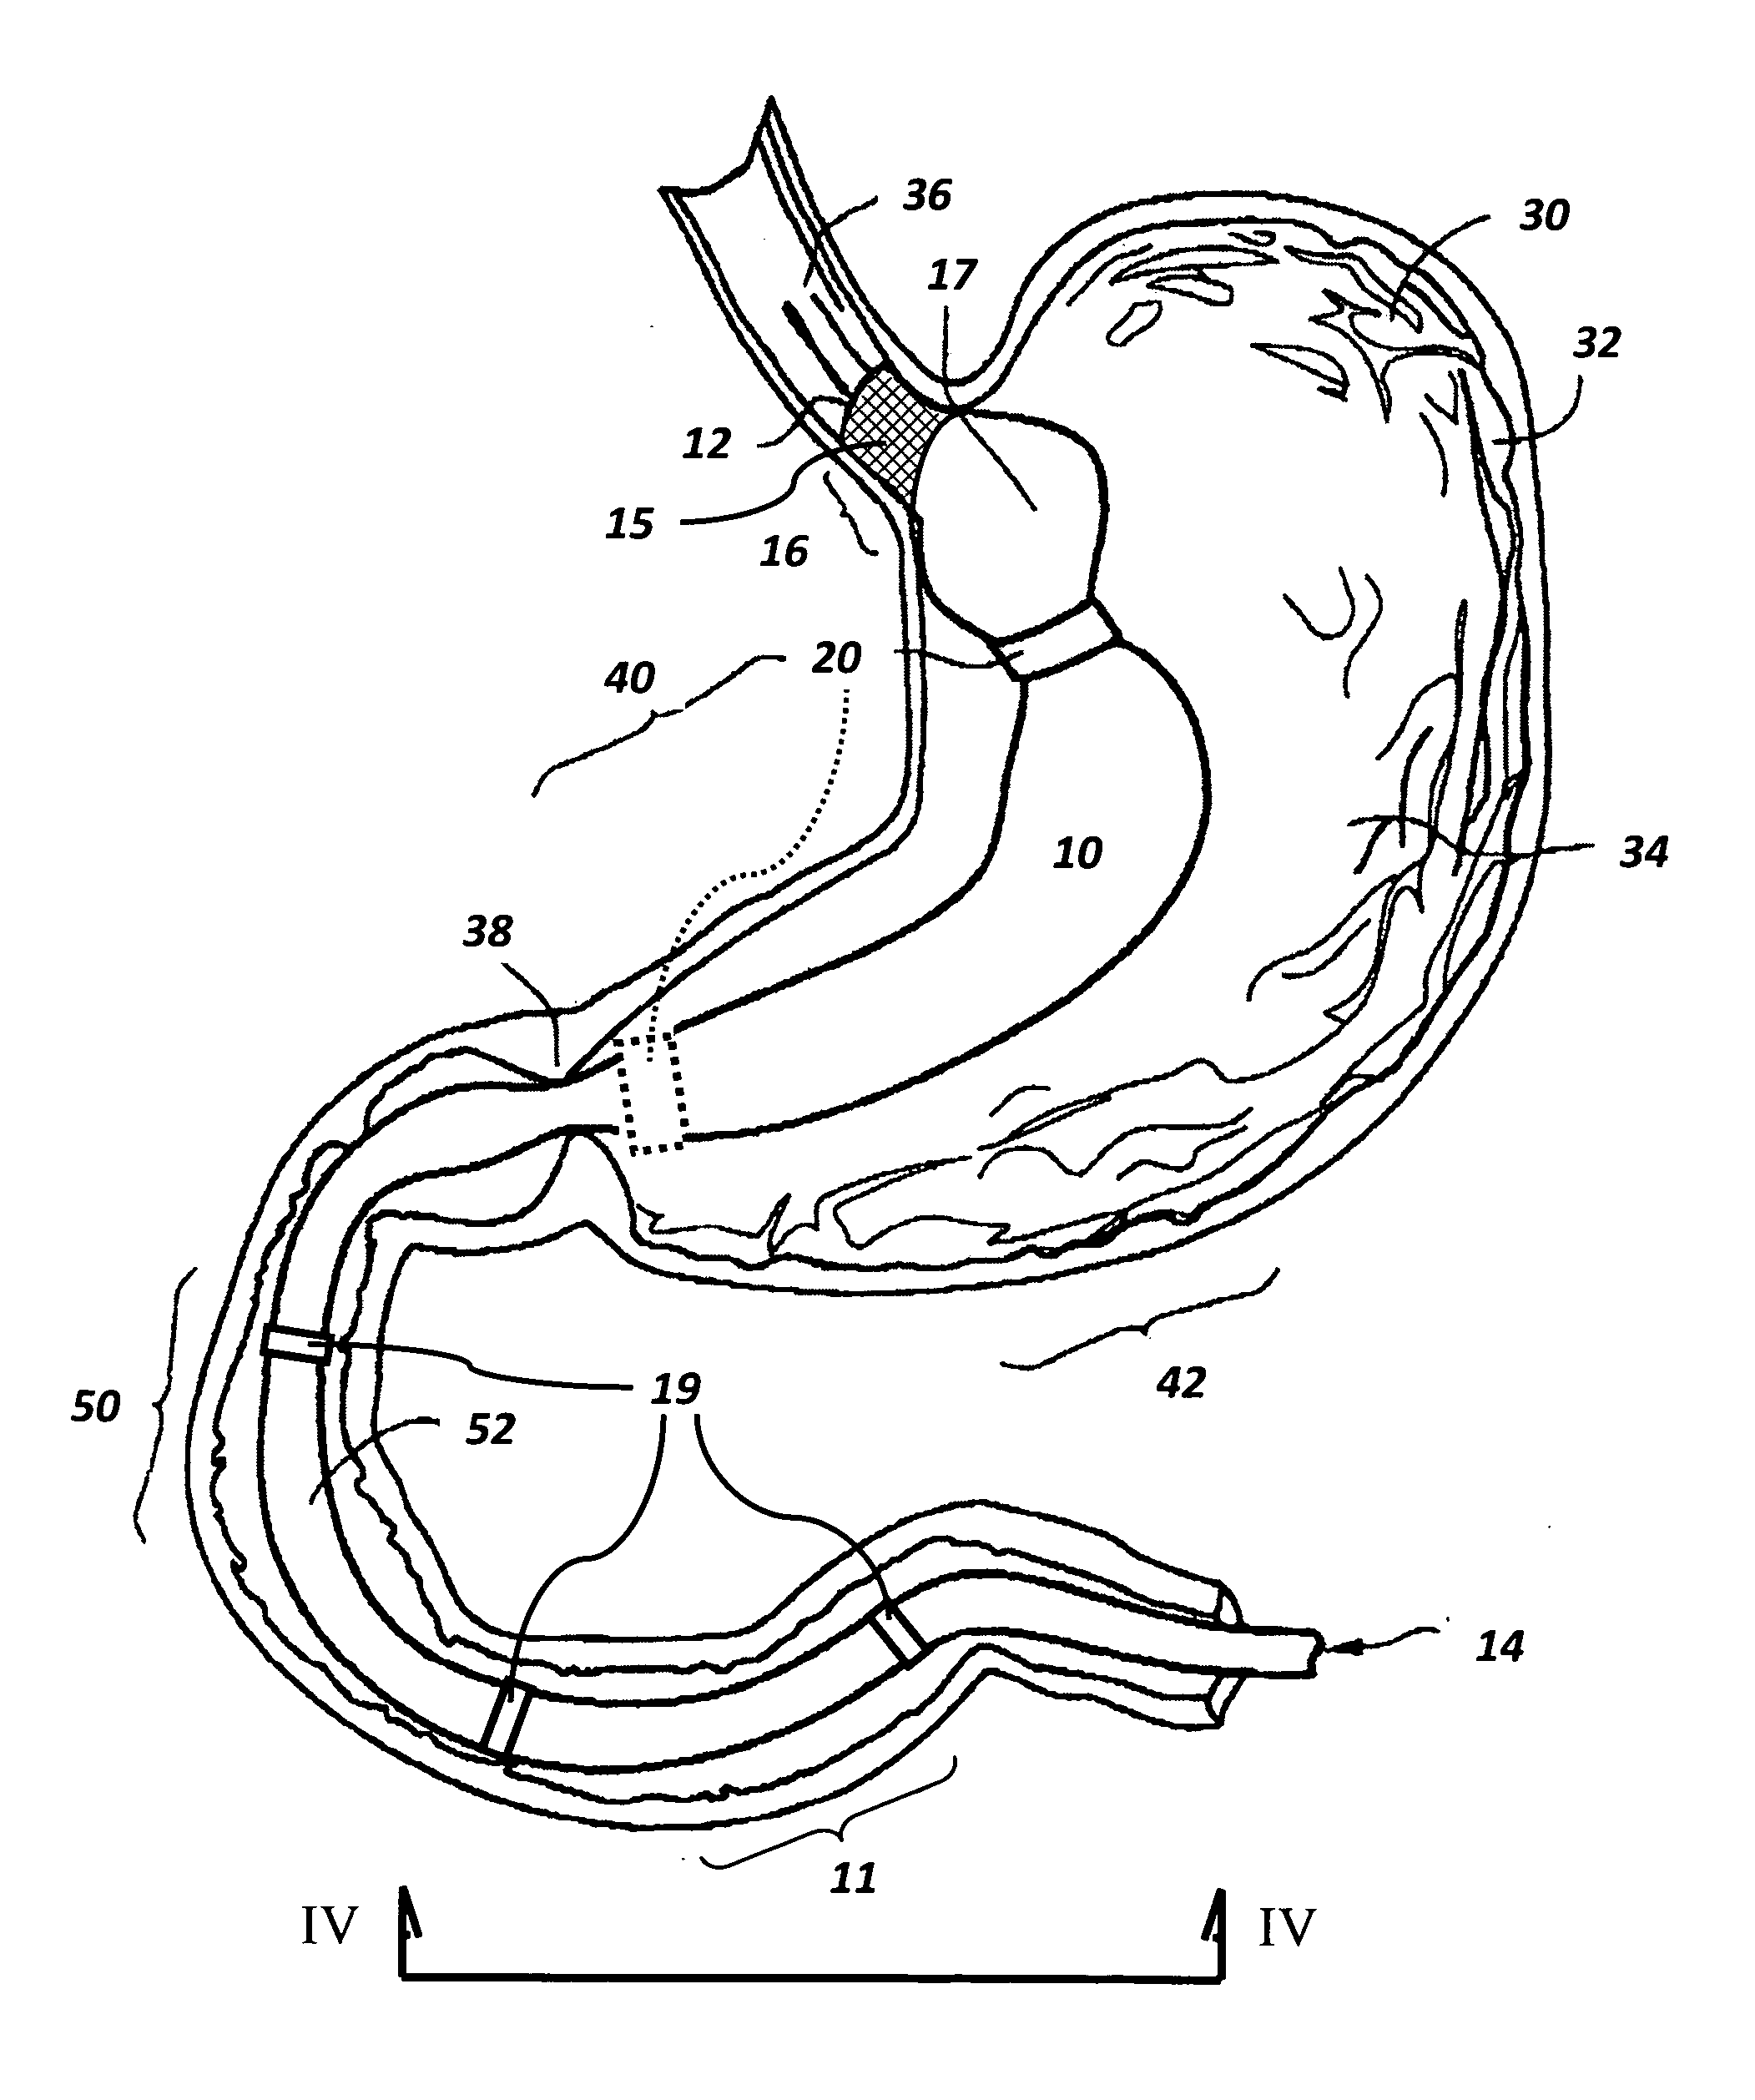 Devices and methods for endolumenal therapy